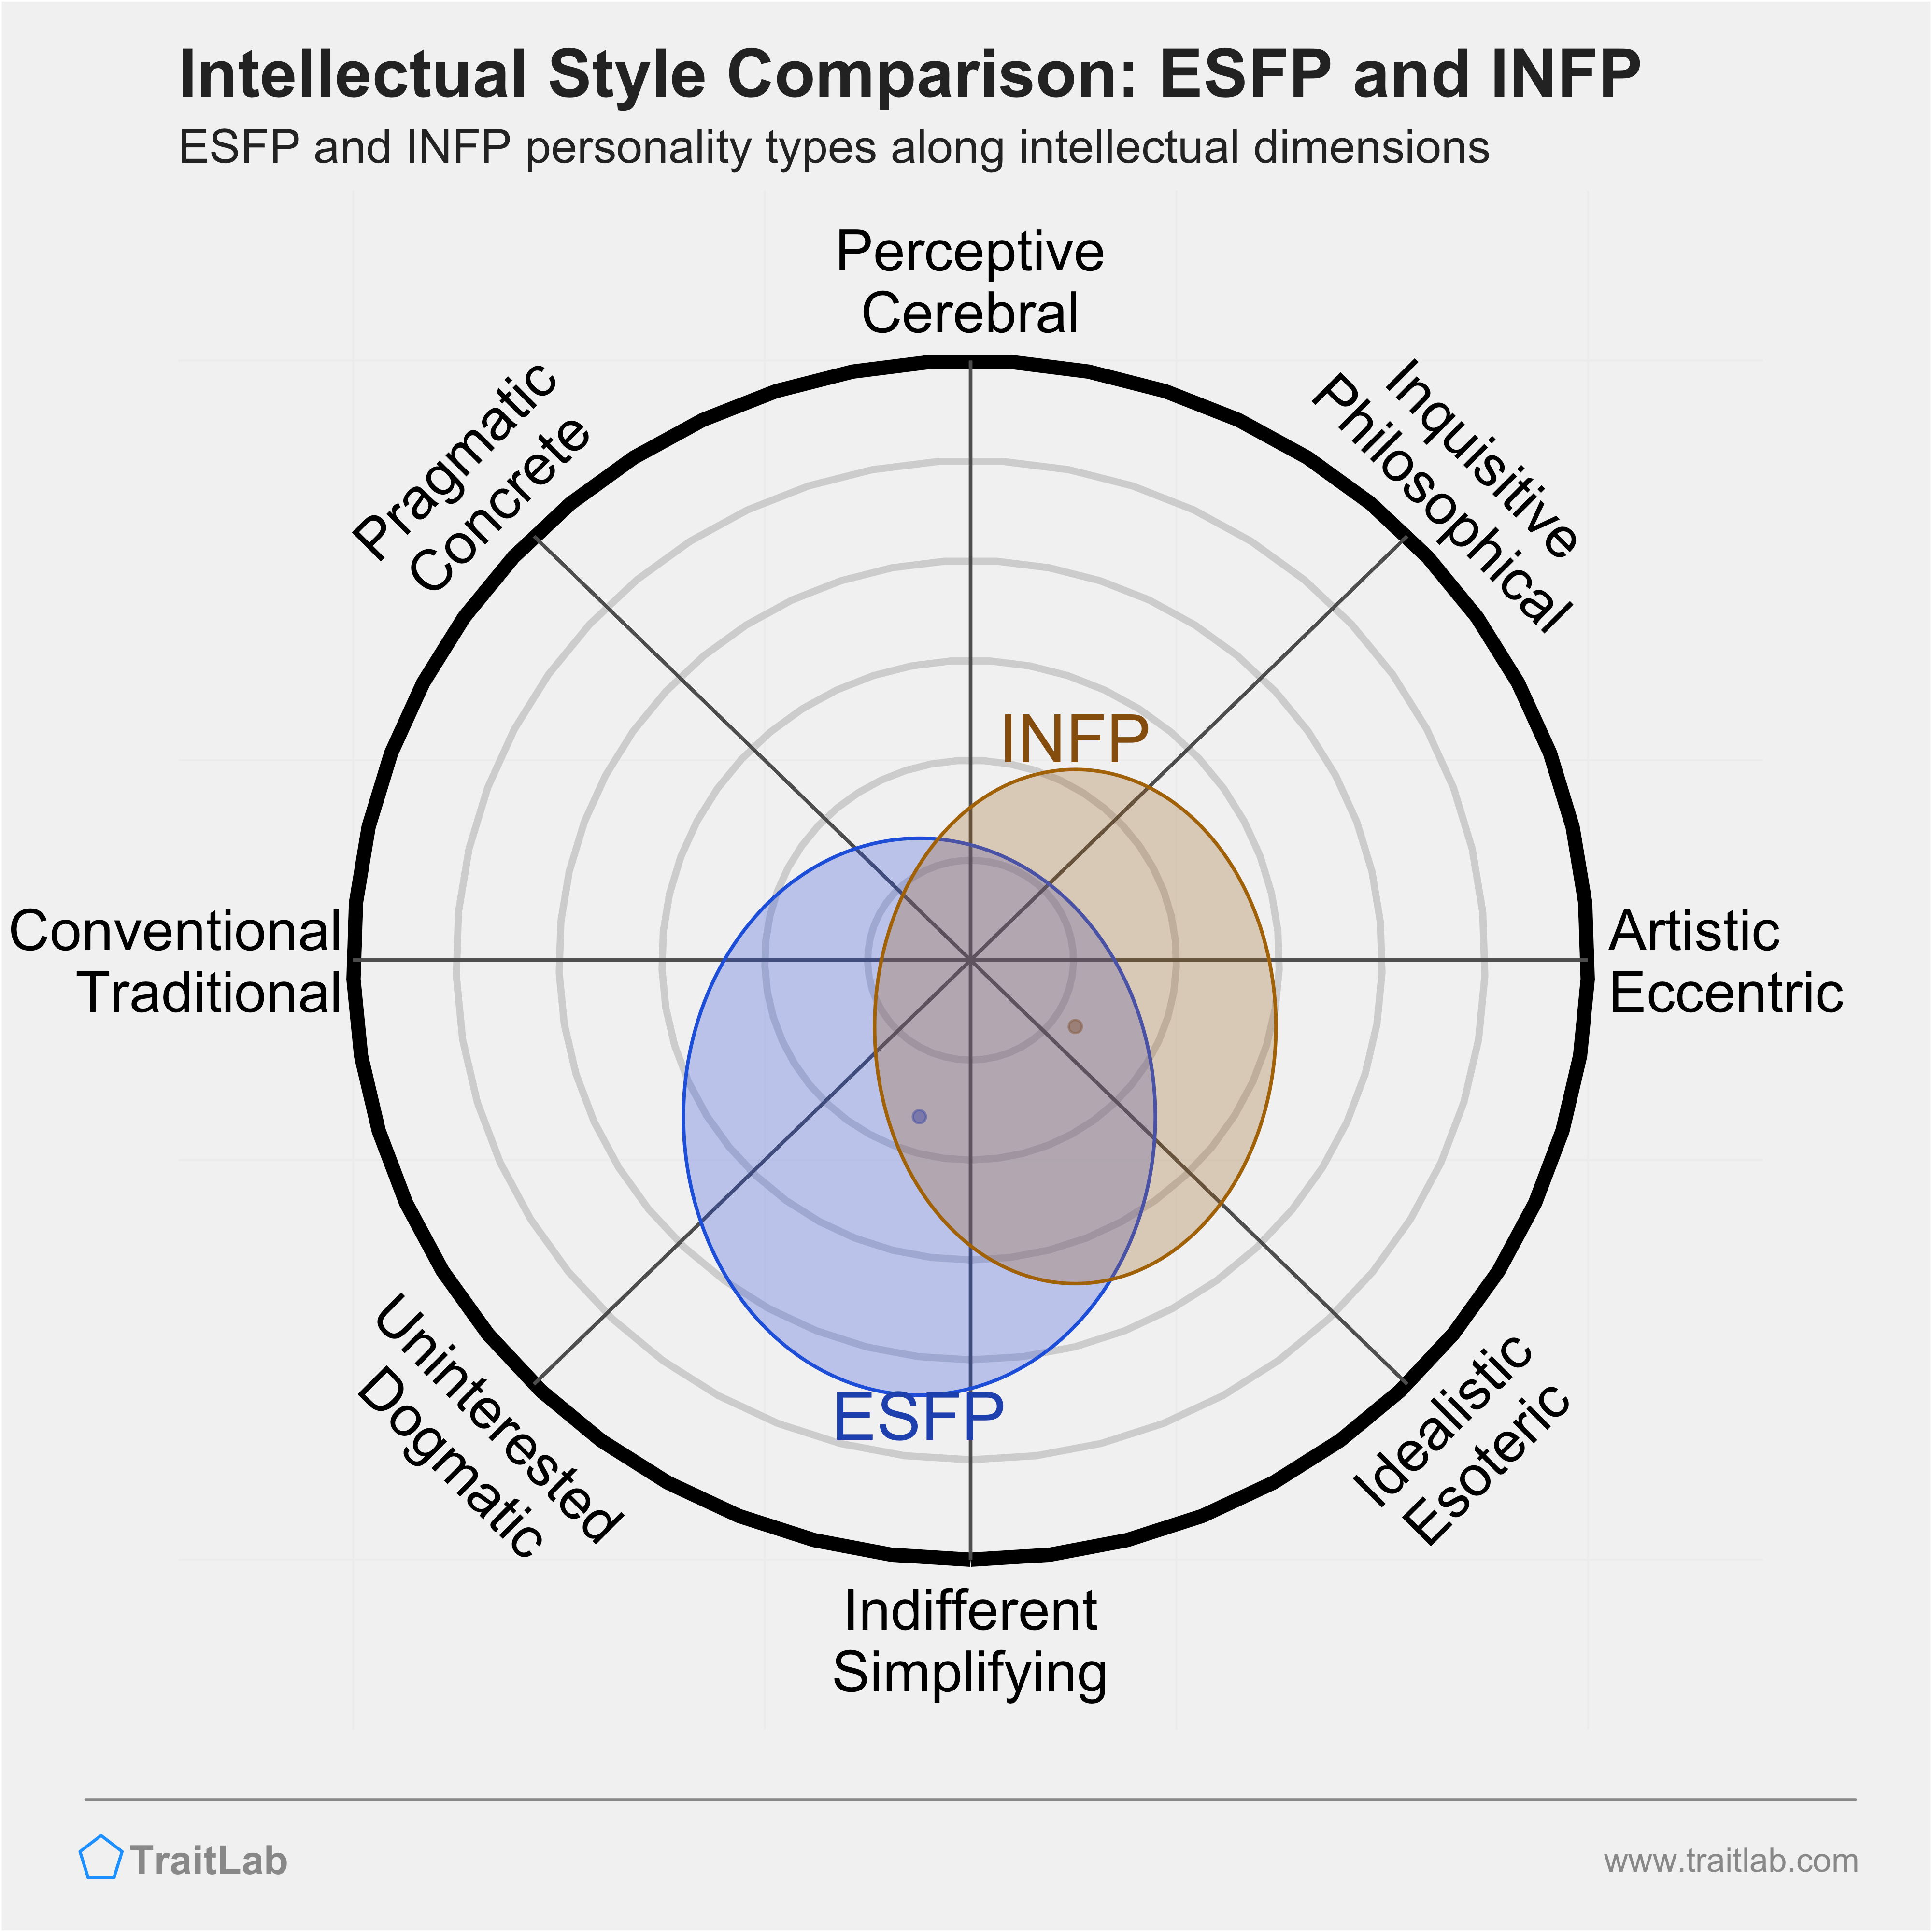 ESFP and INFP comparison across intellectual dimensions